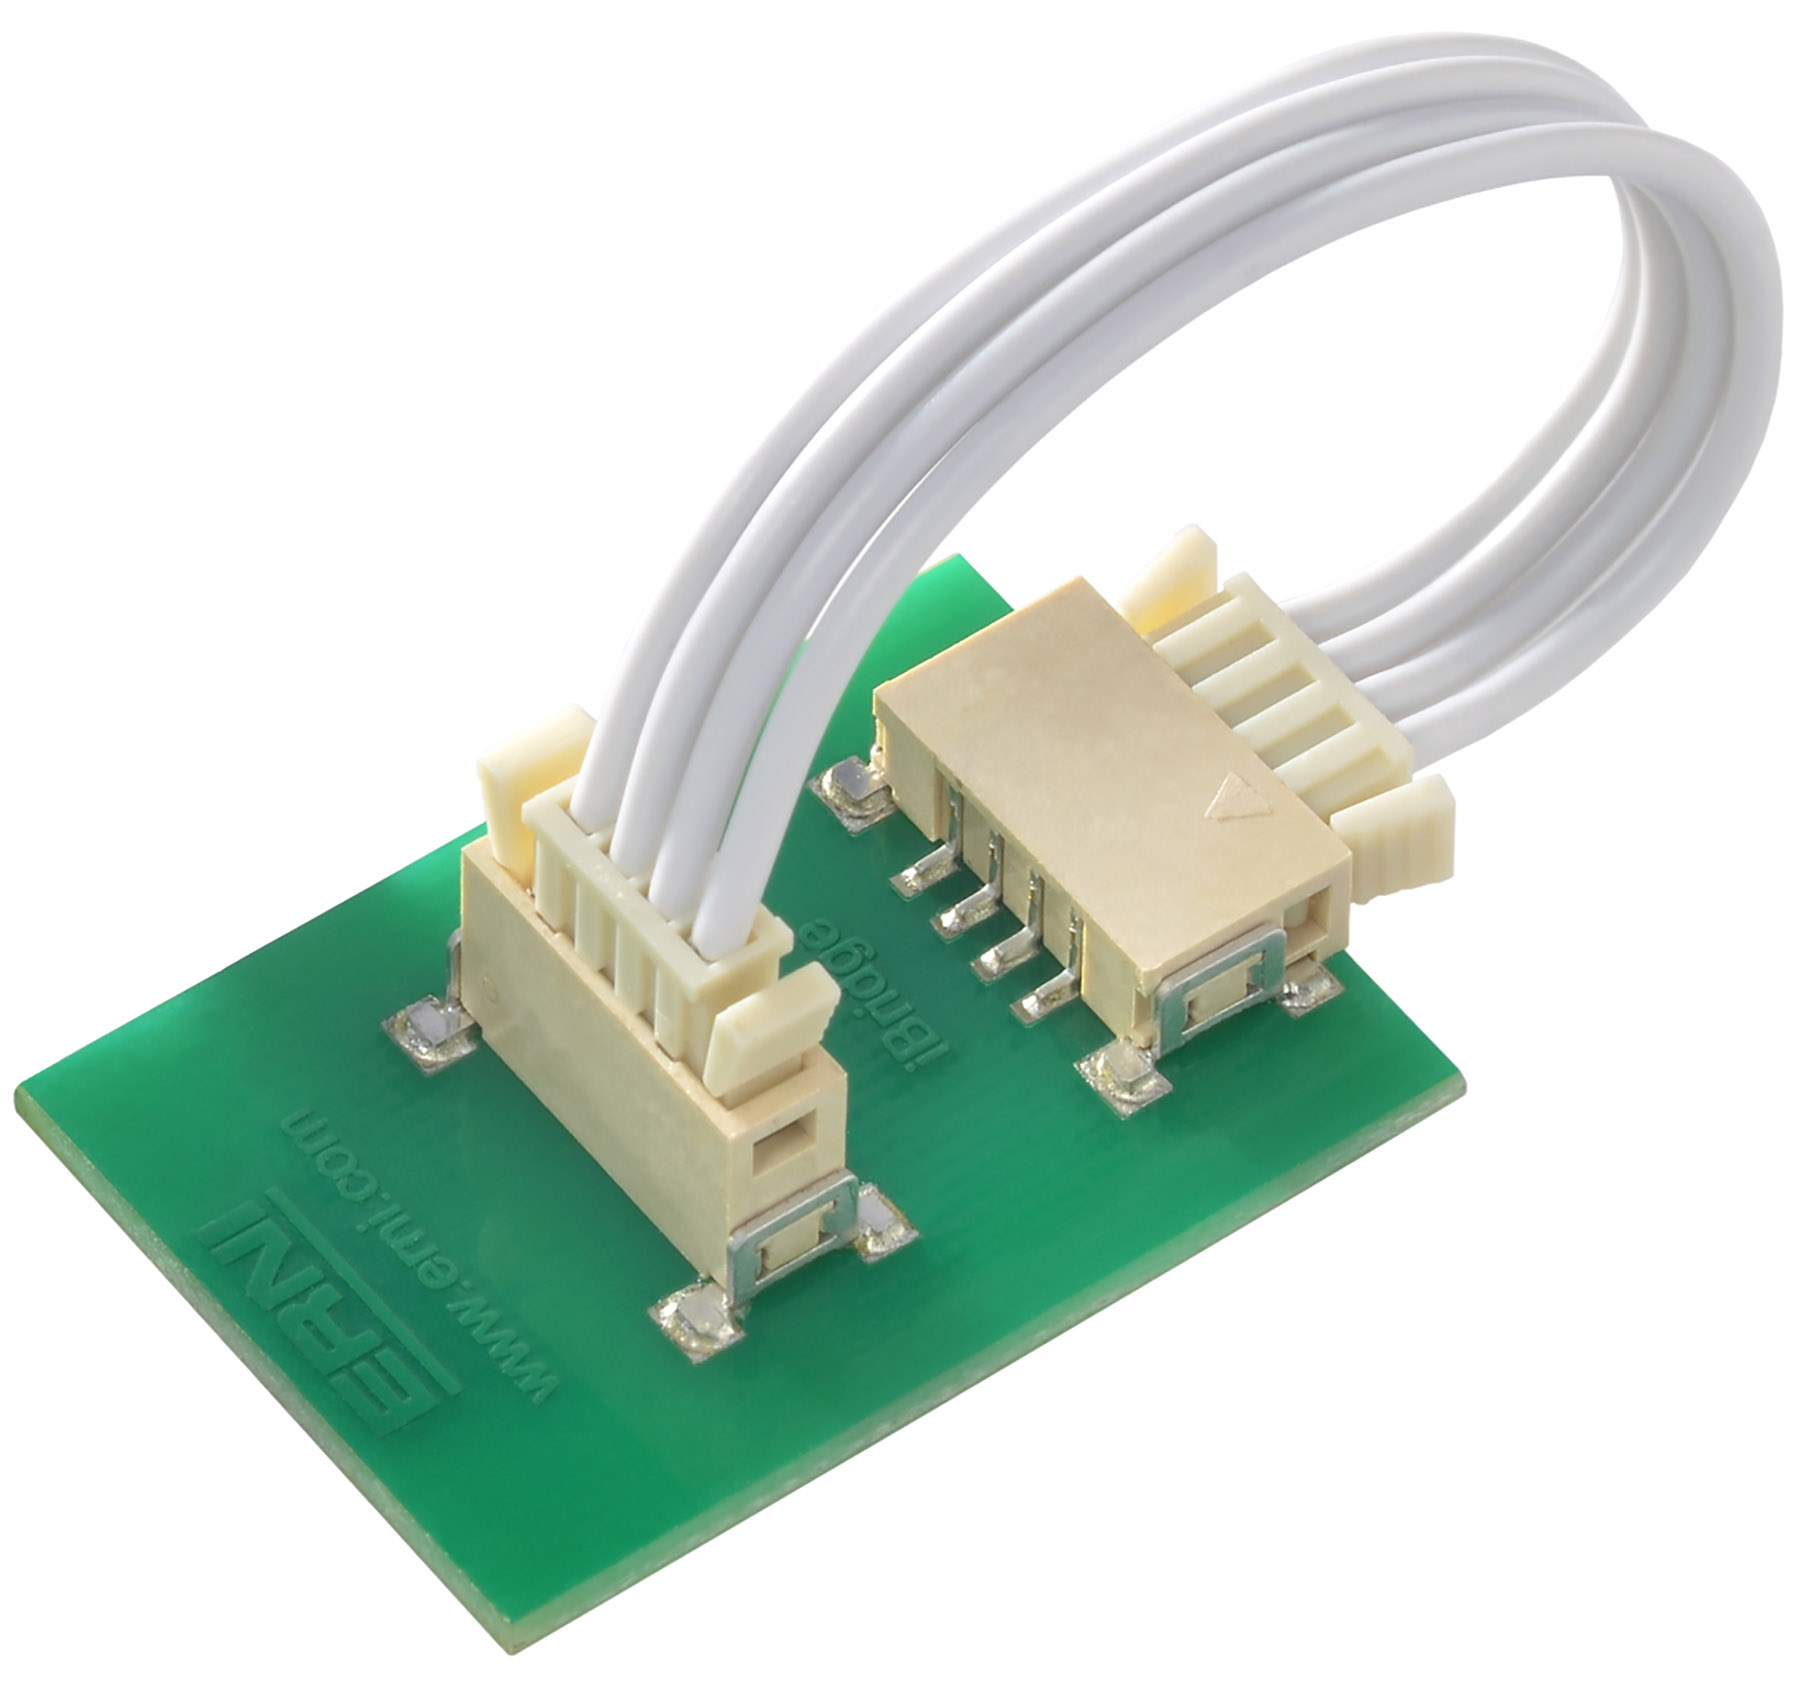 Wiretoboard connector system maintains a small outline Electronic Products